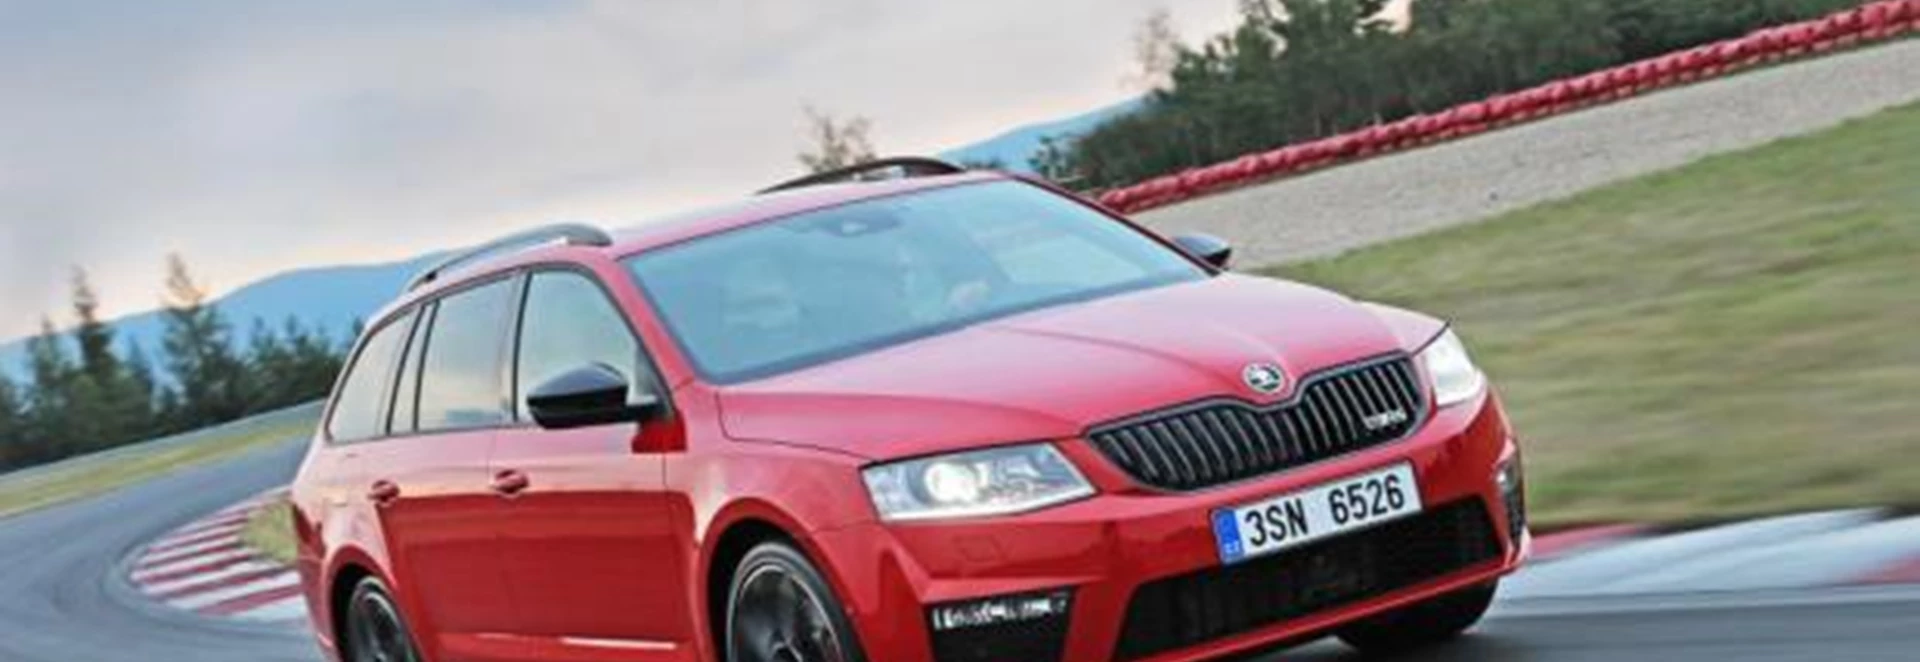 Skoda vRS models to remain exclusive to the Octavia